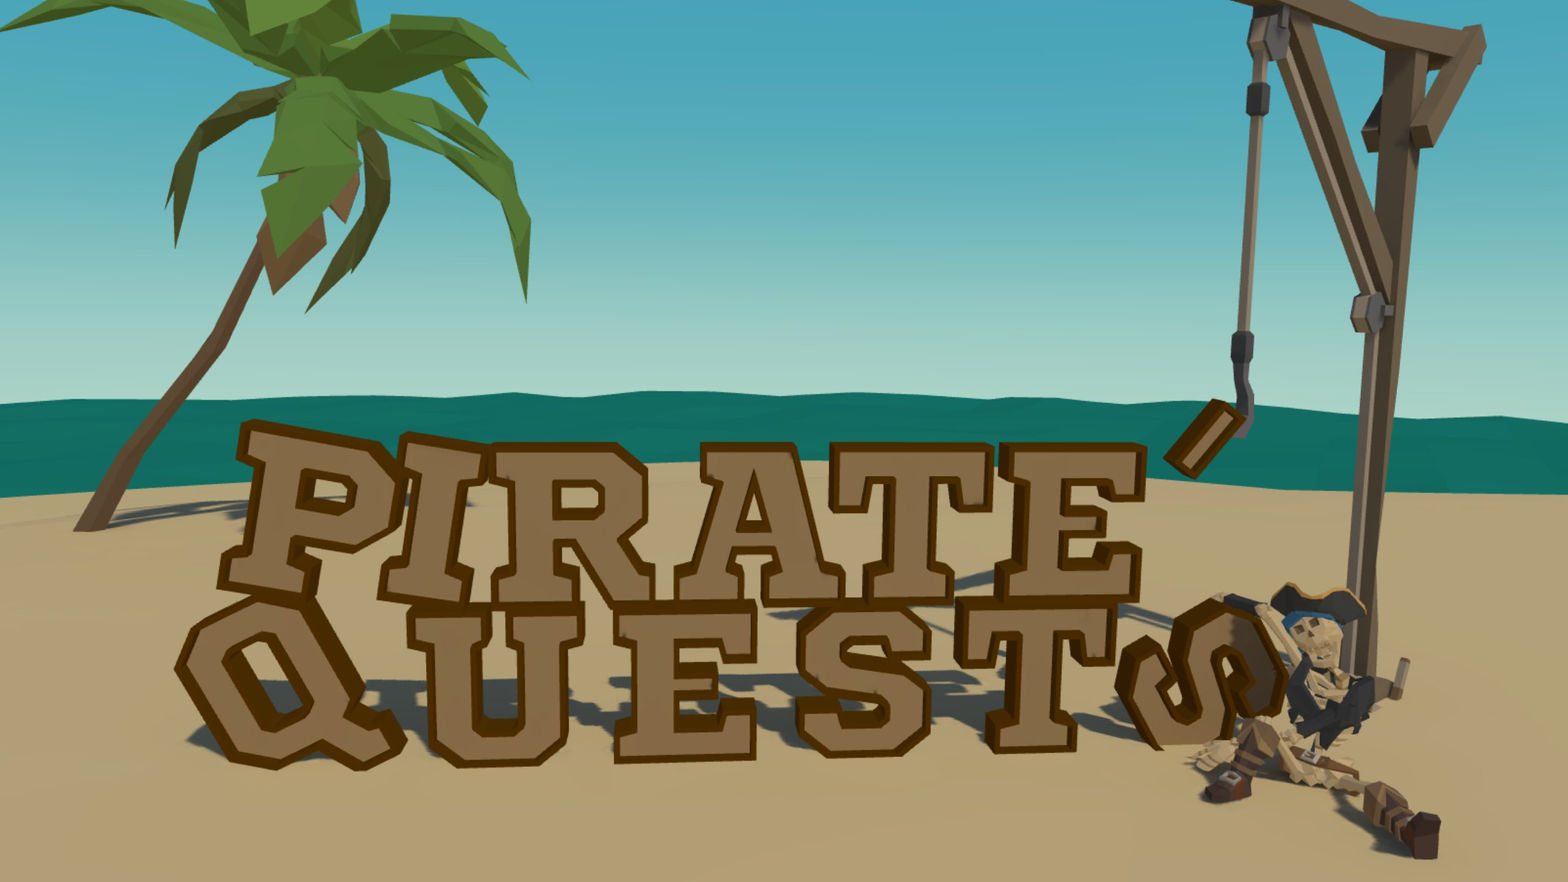 Pirate's Quest - Research Experience